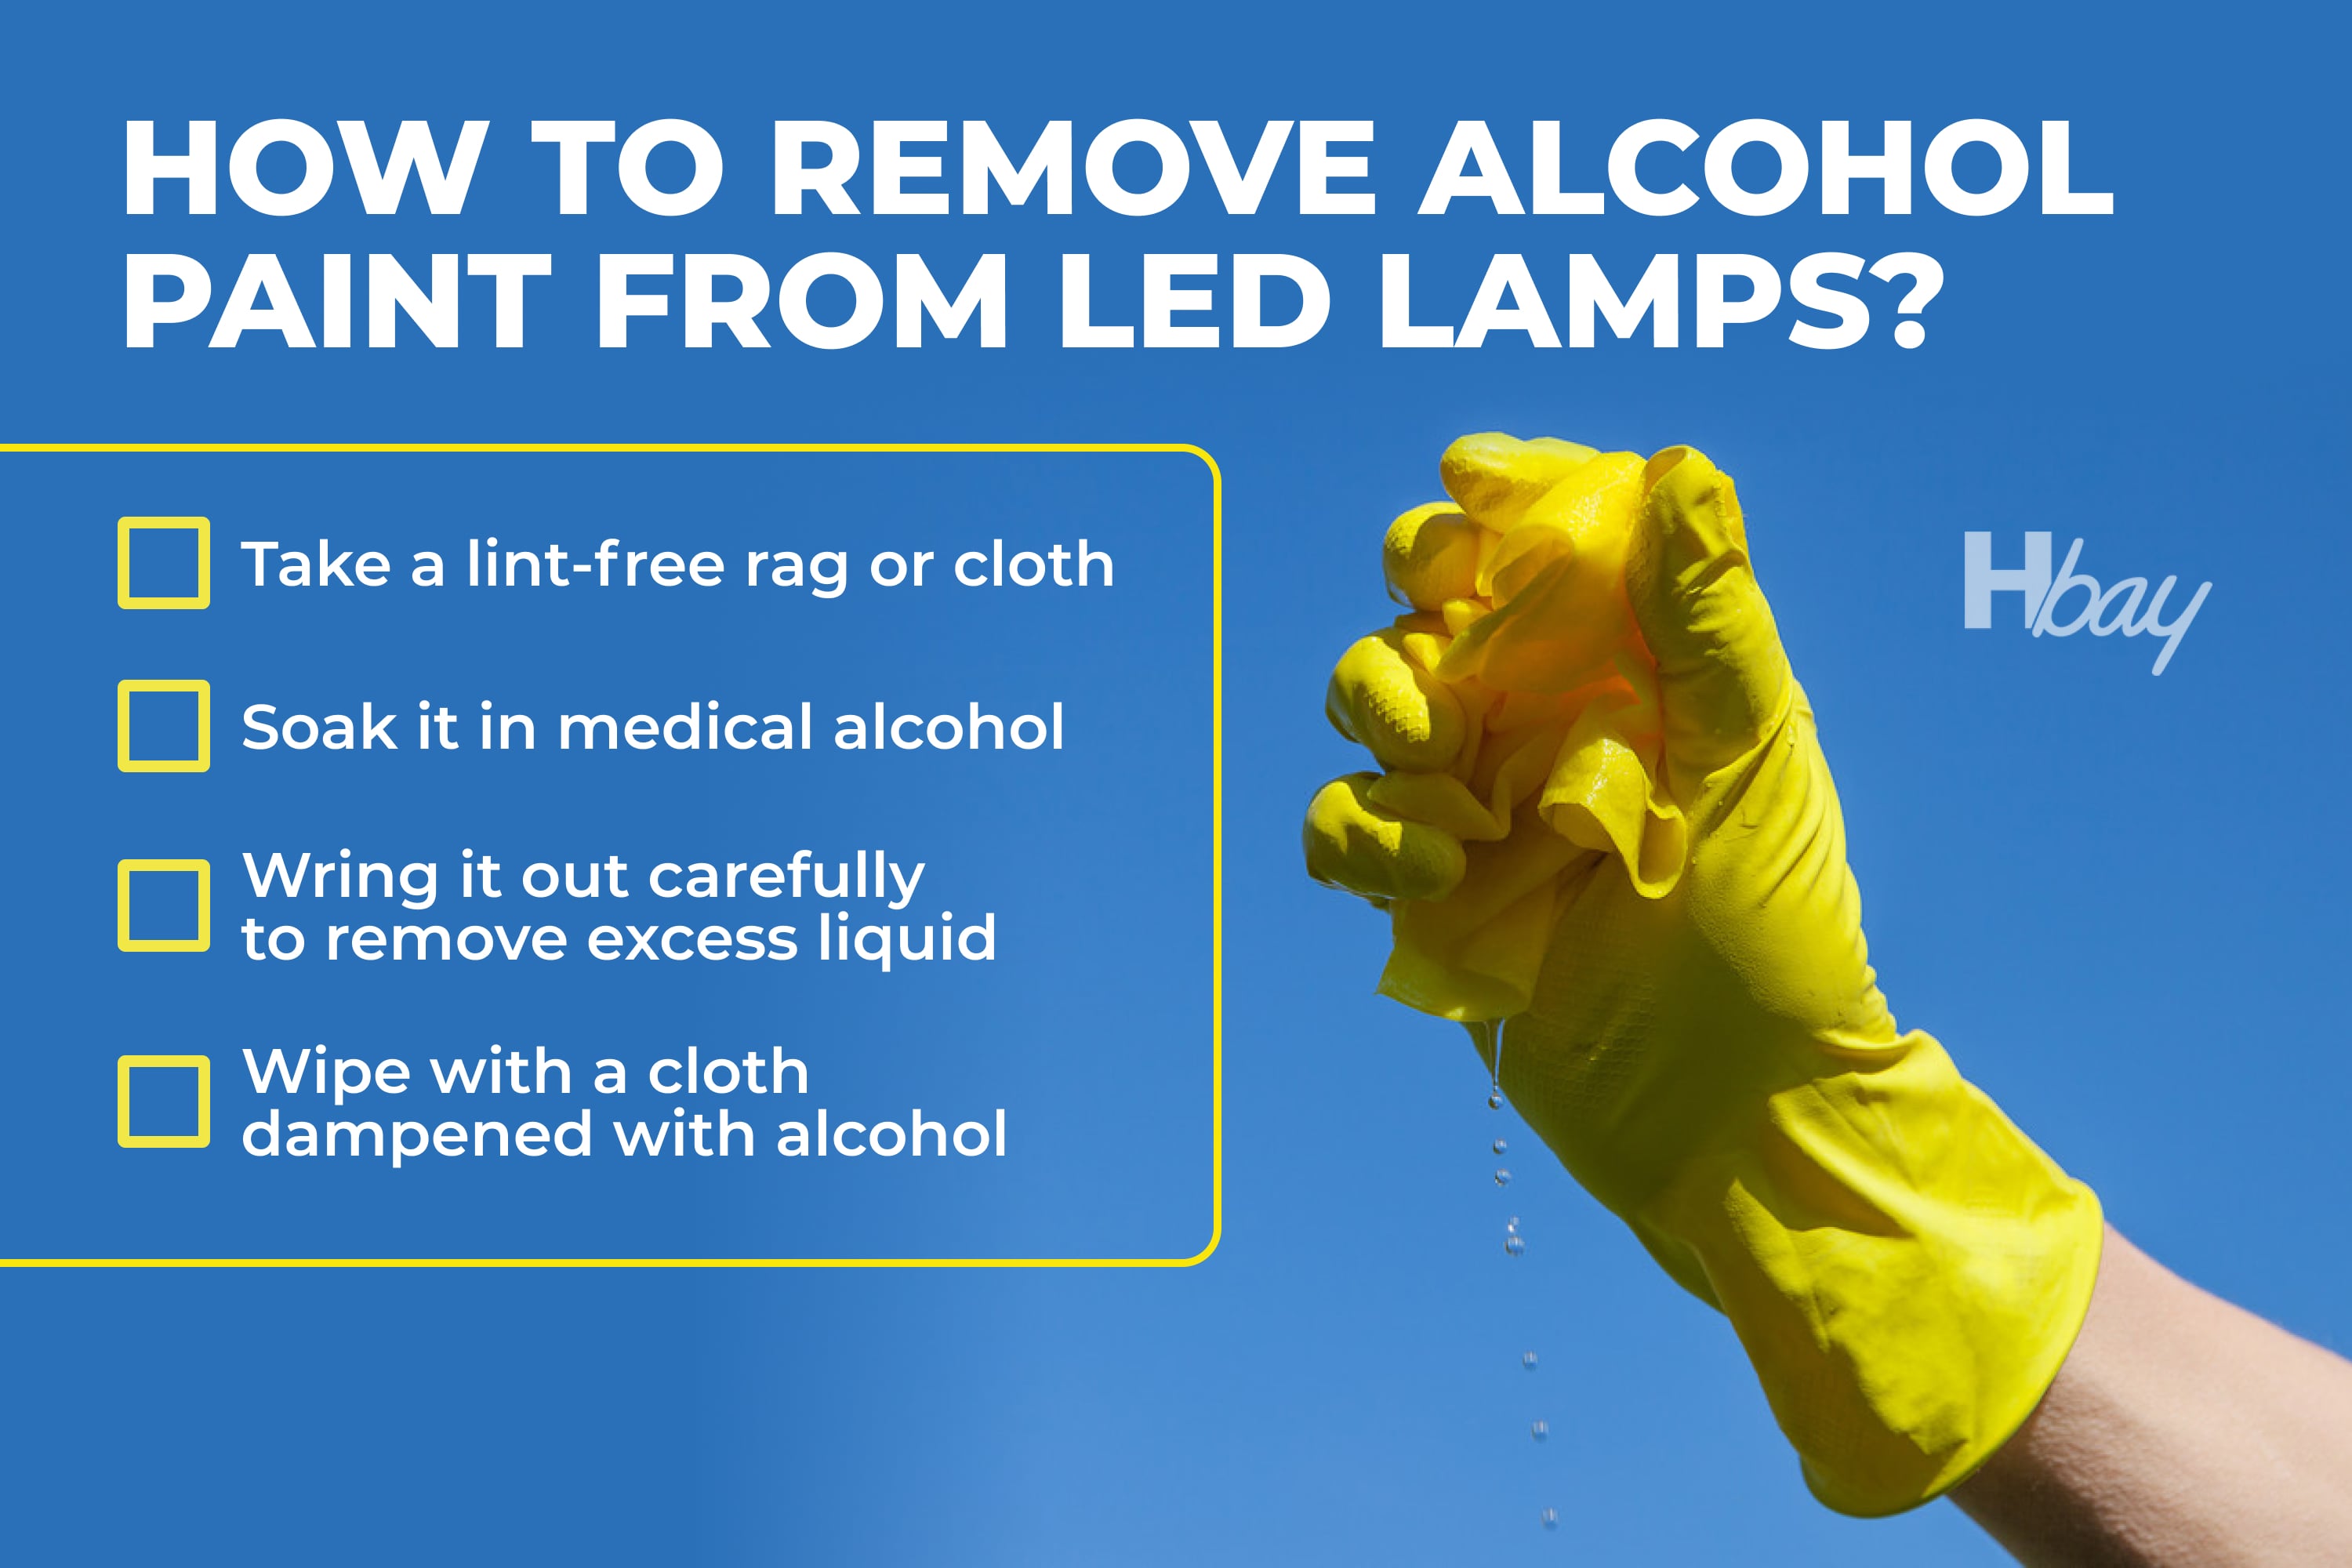 How to remove alcohol paint from LED lamps